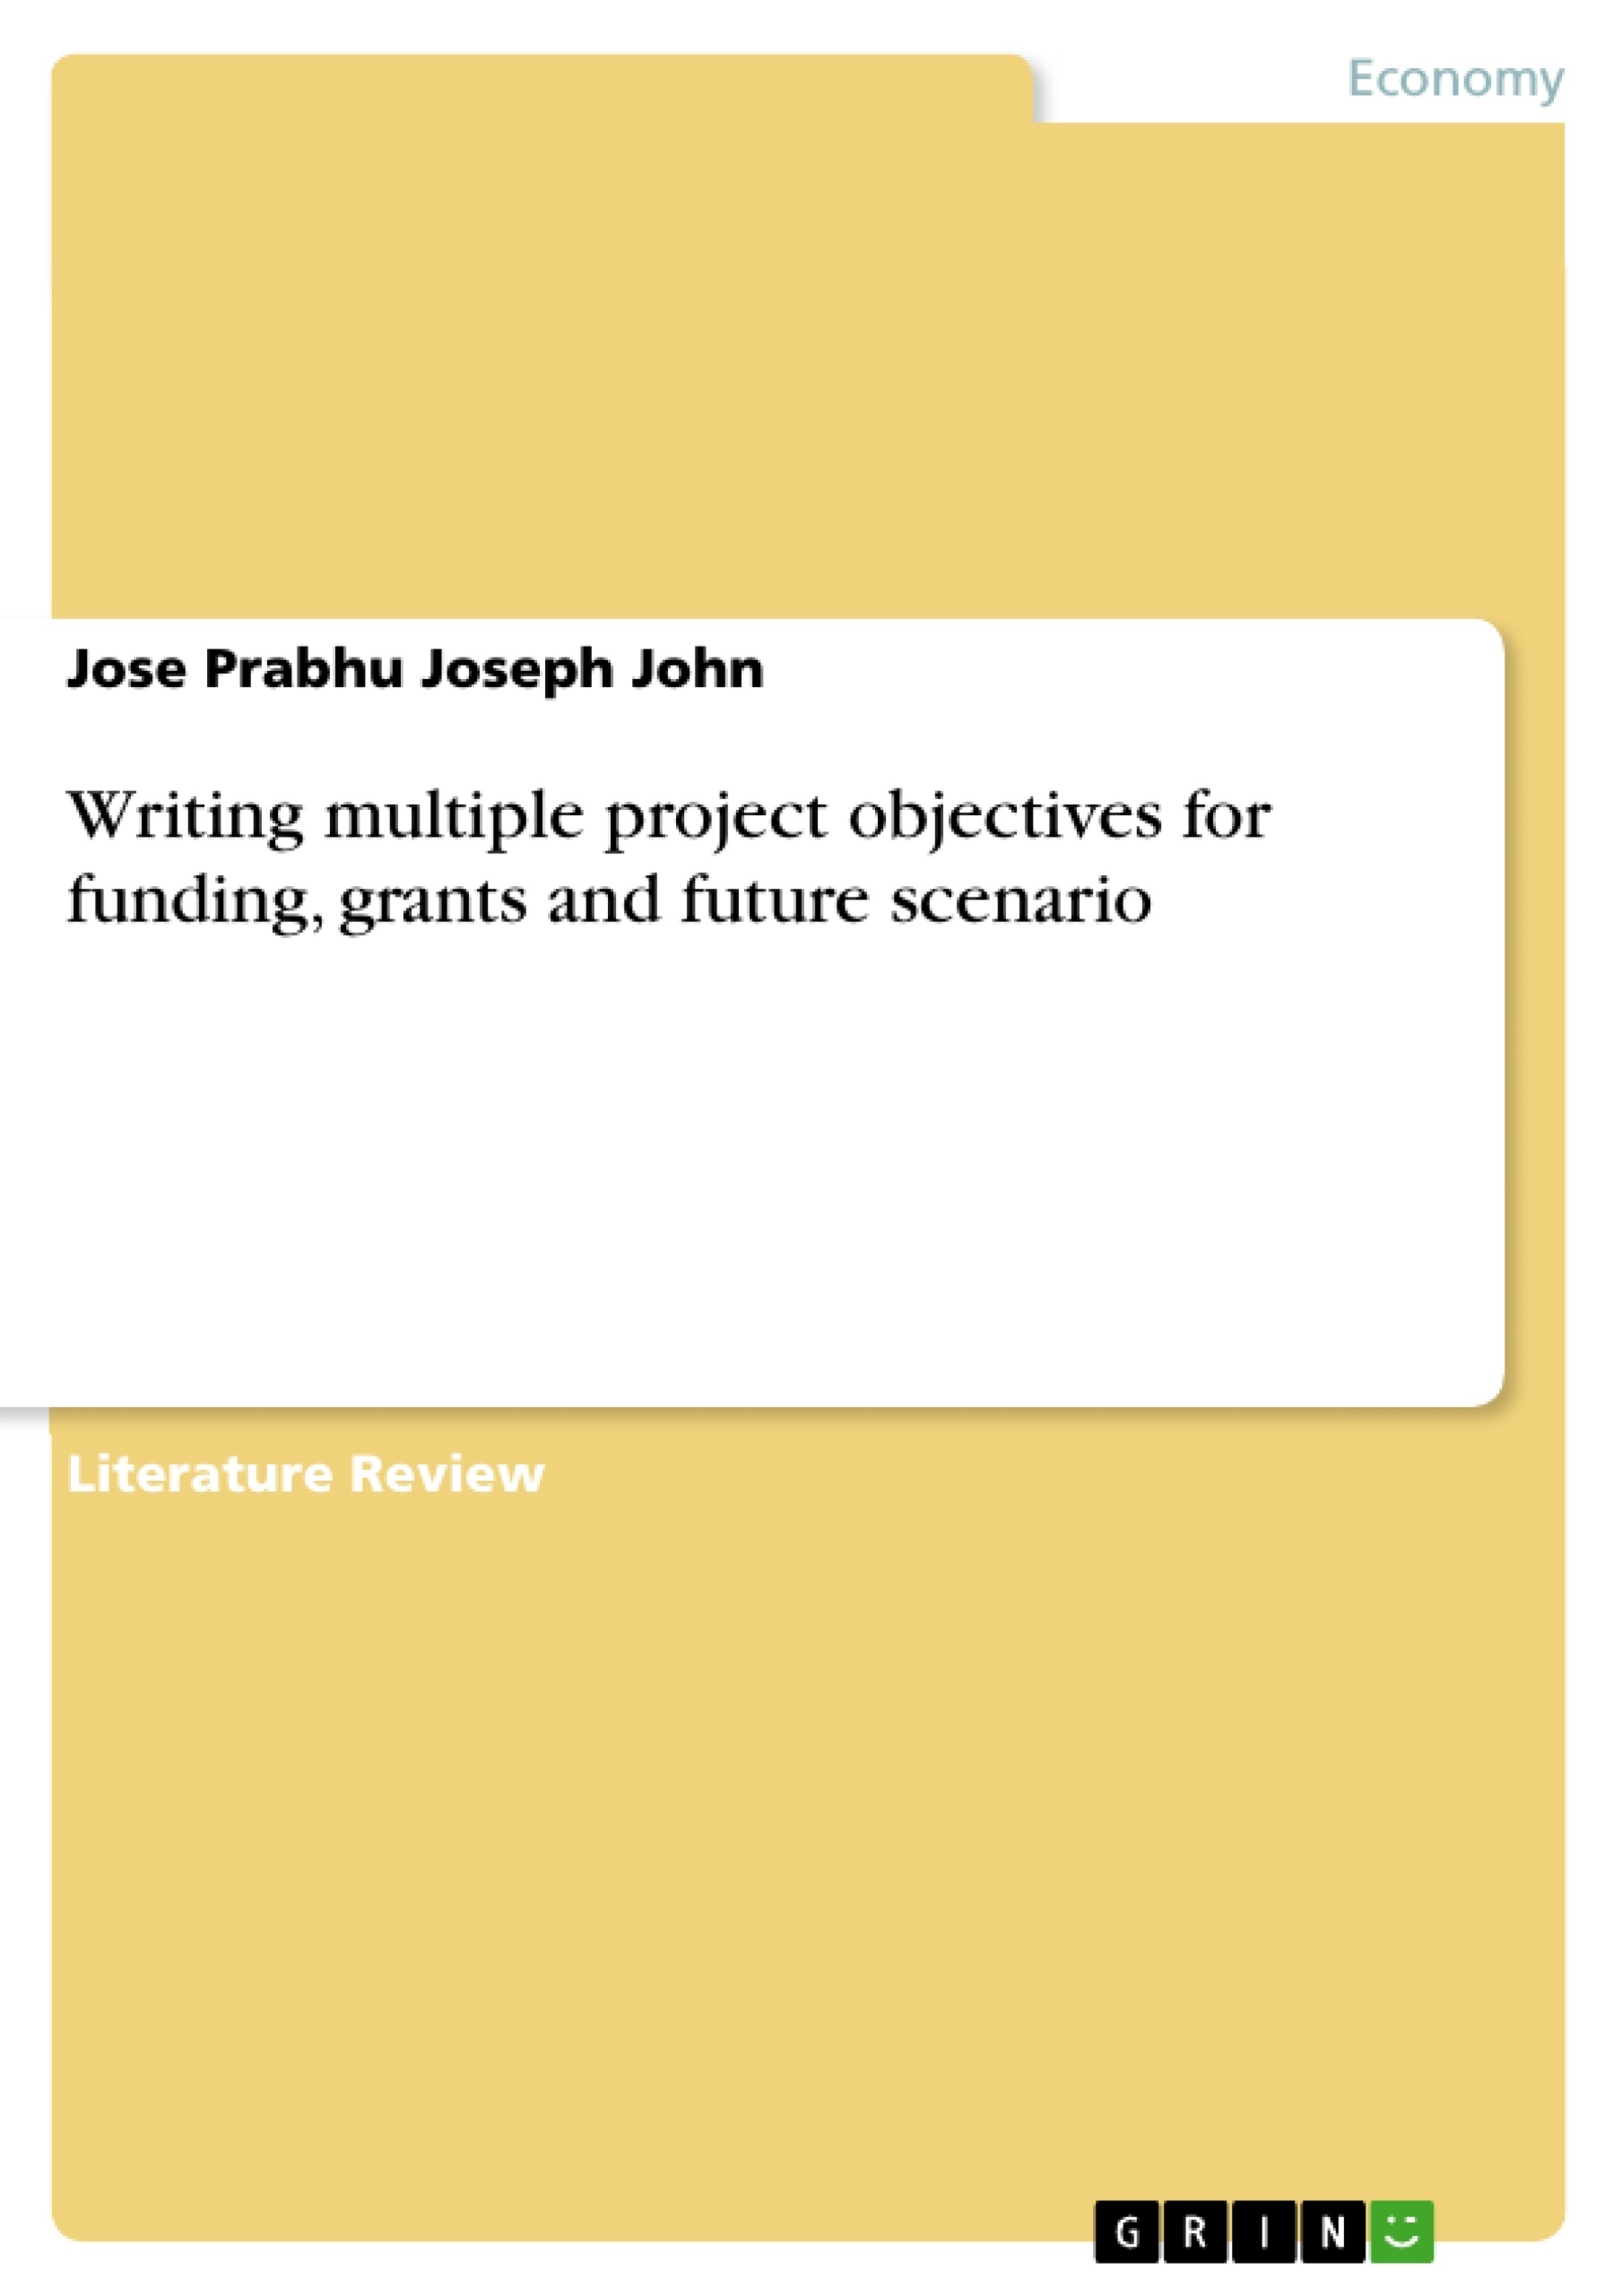 Titel: Writing multiple project objectives for funding, grants and future scenario